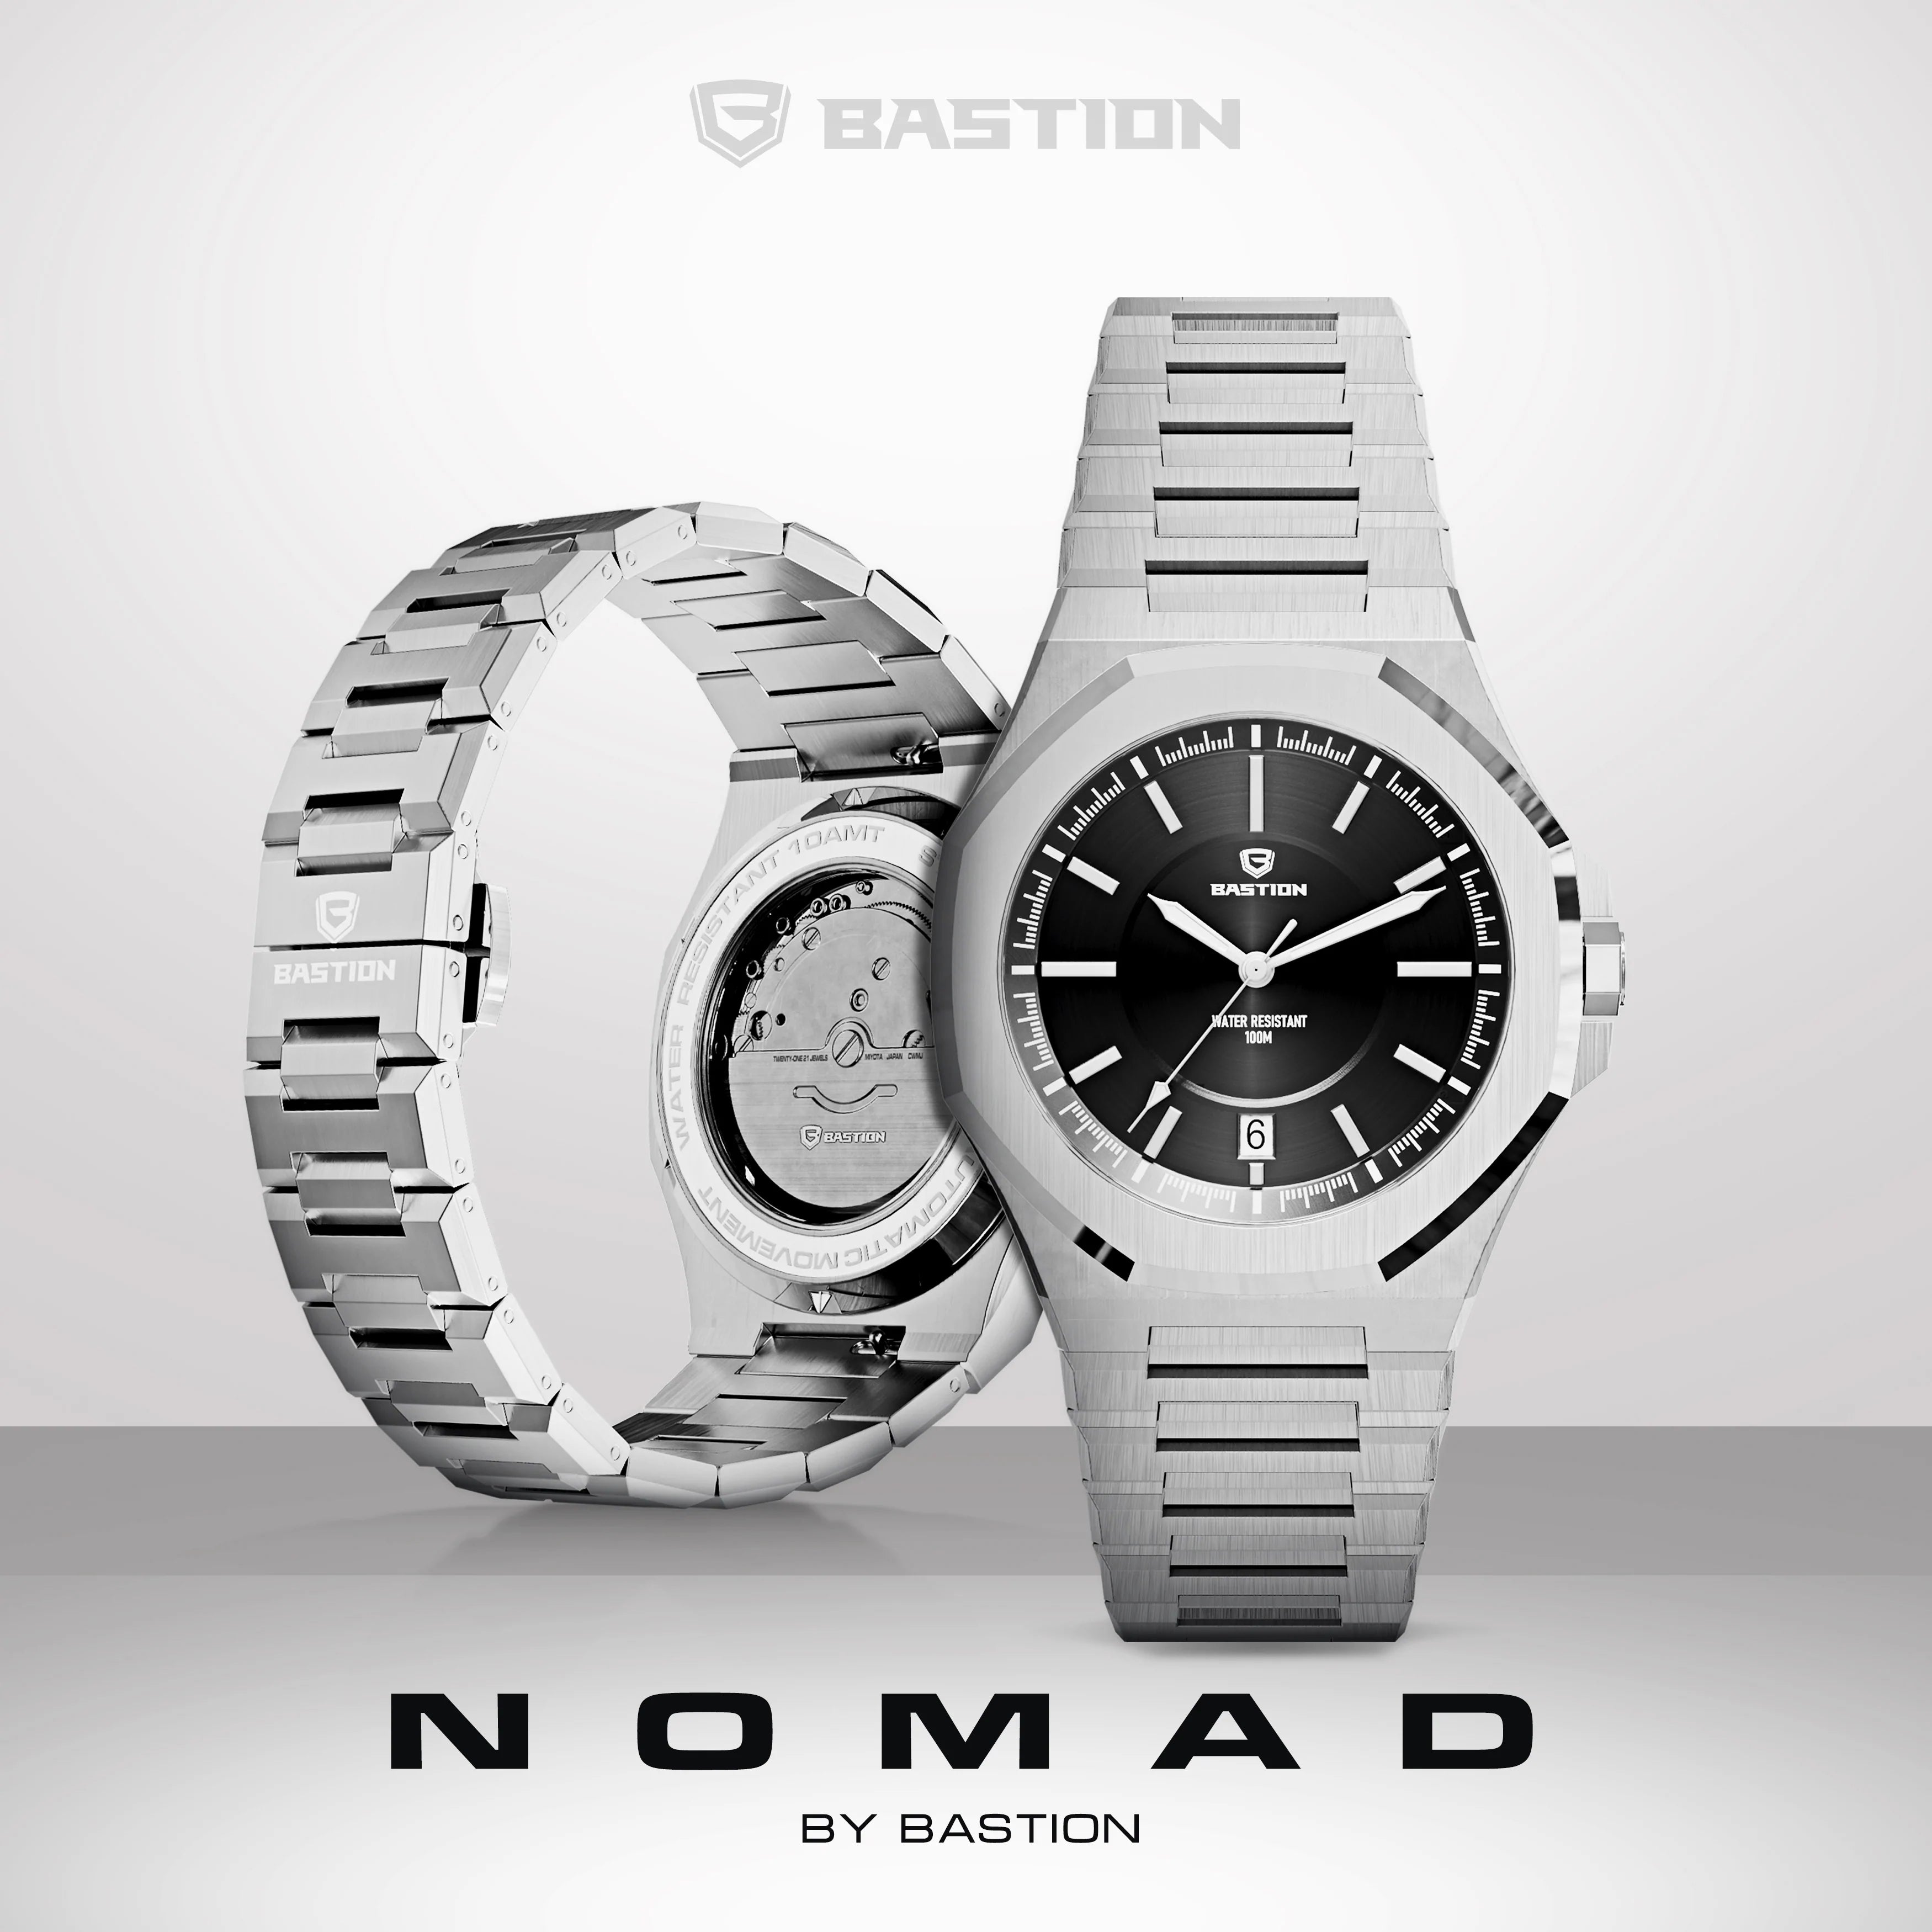 STAINLESS STEEL WATCH BAND - Bastion Bolt Action Pen